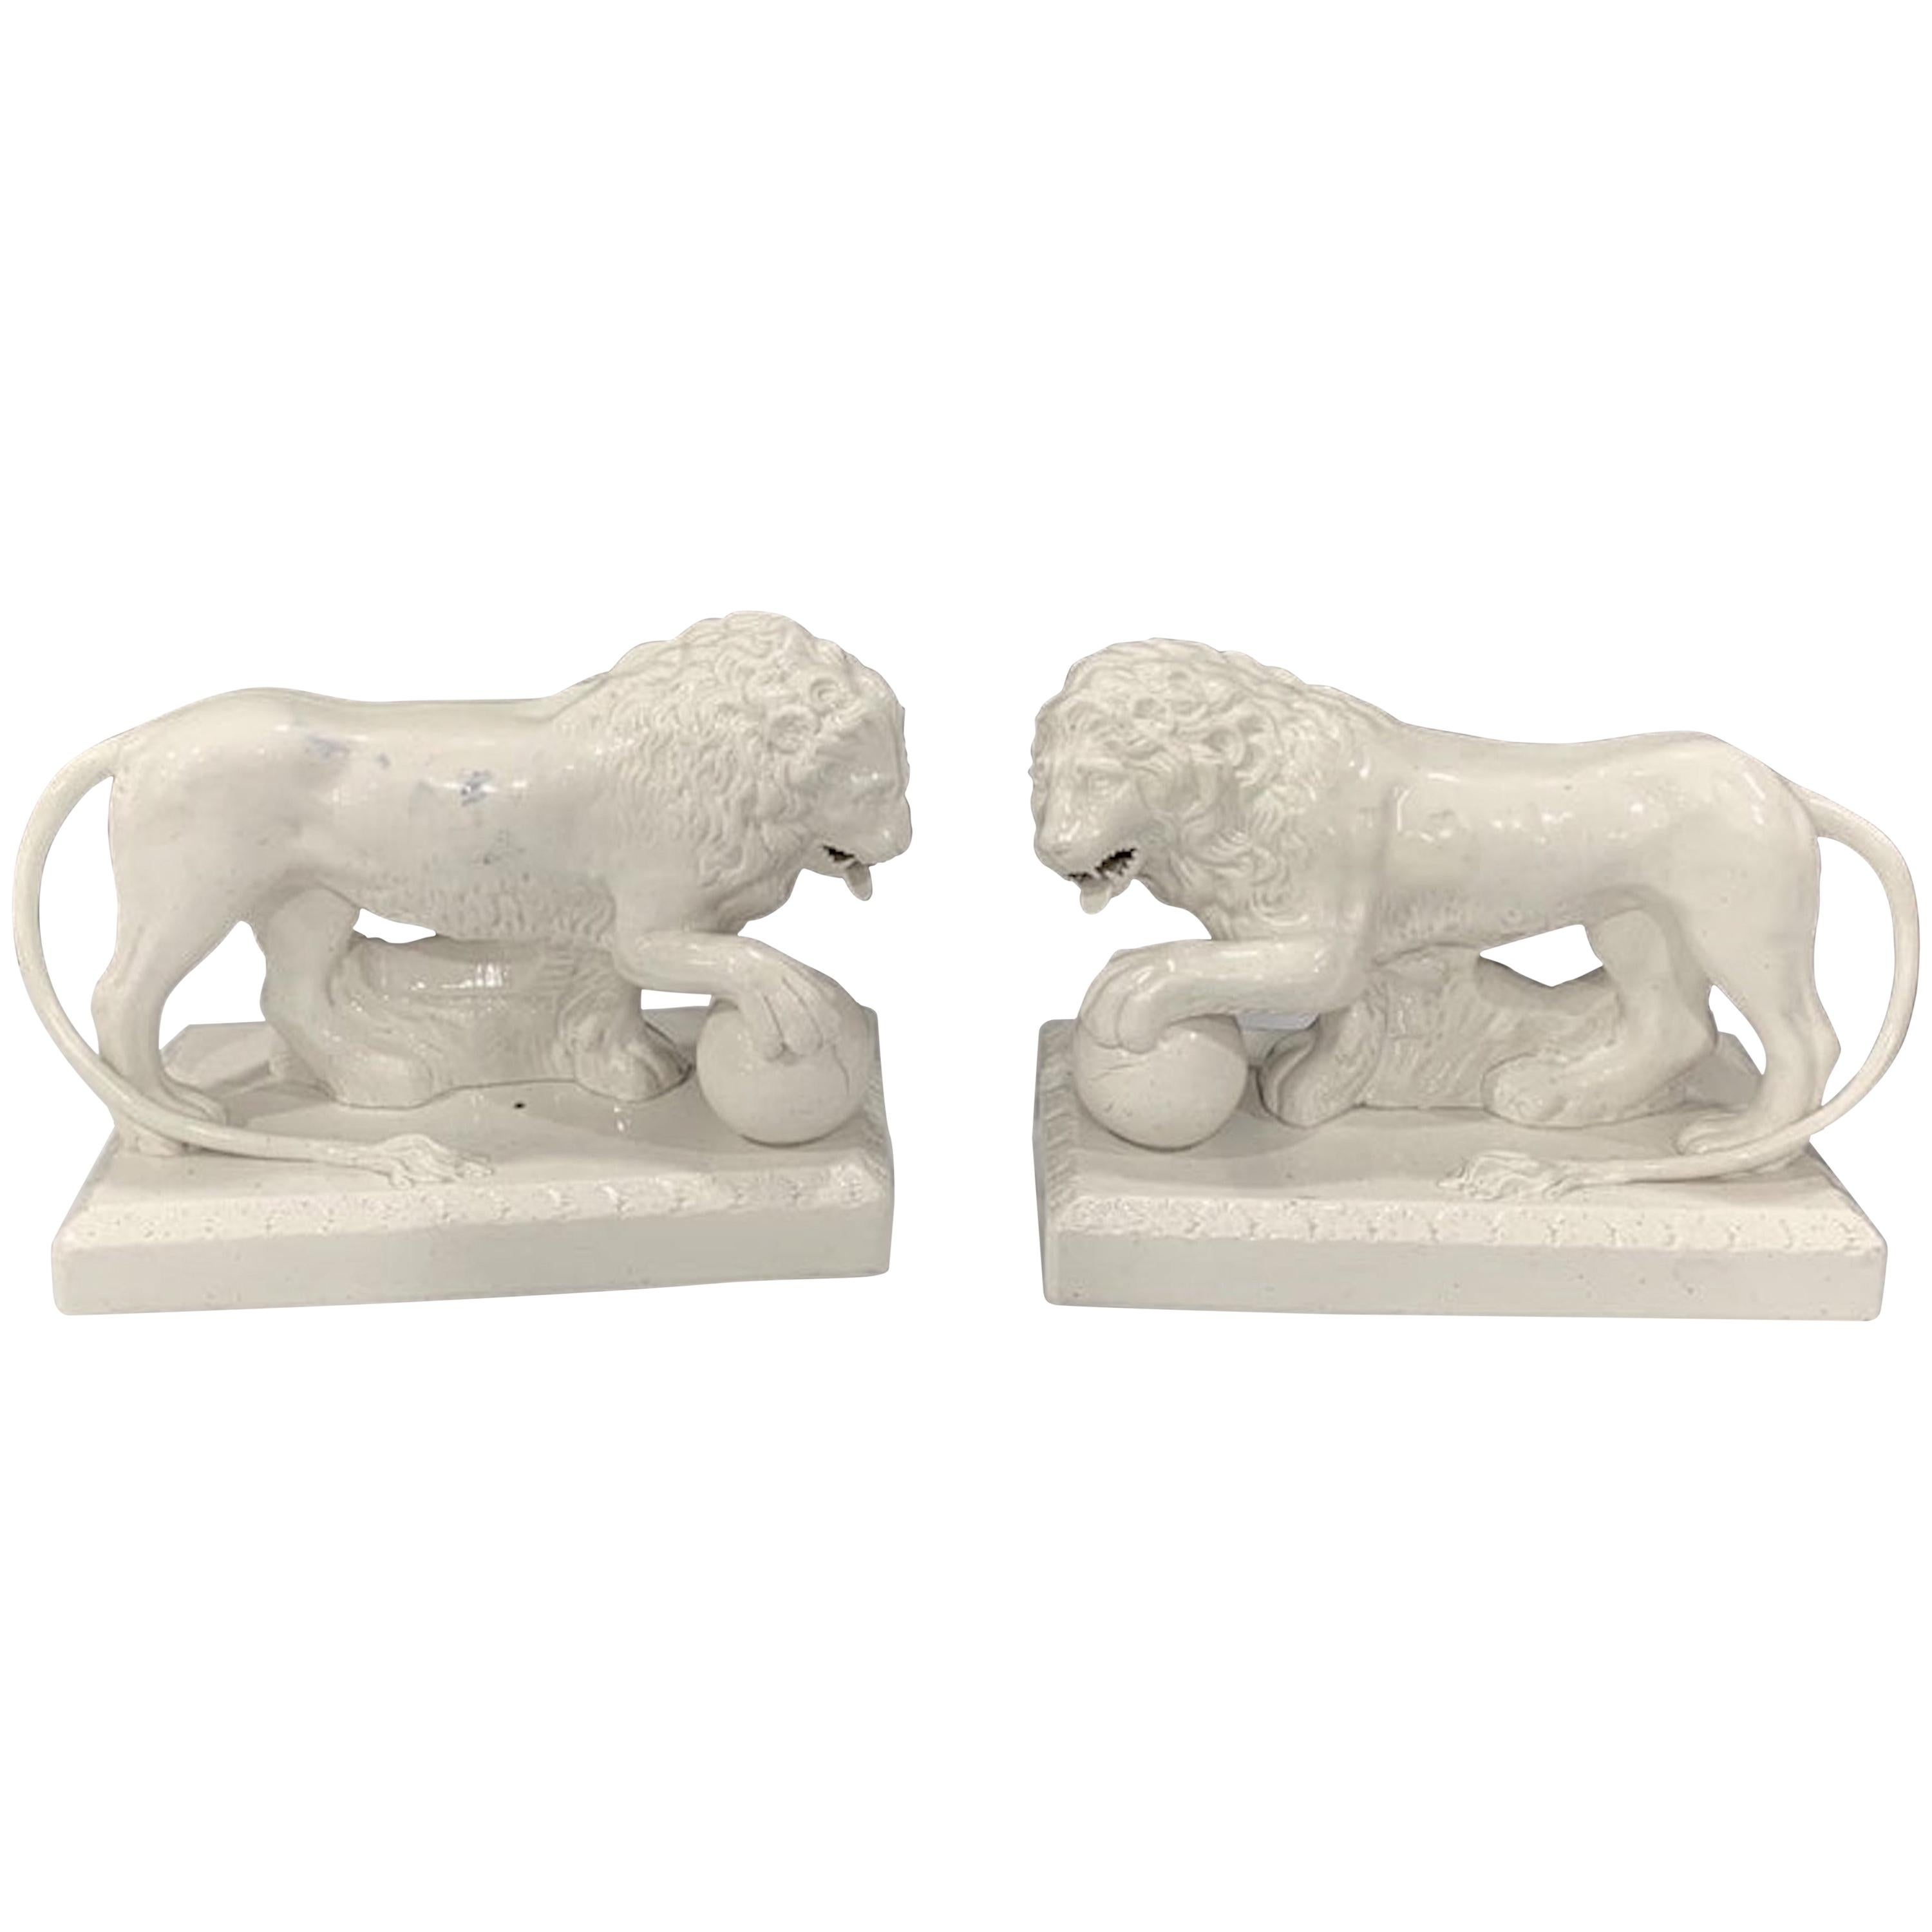 Pair of 19th Century English Creamware/Pearlware Model of the Medici Lions